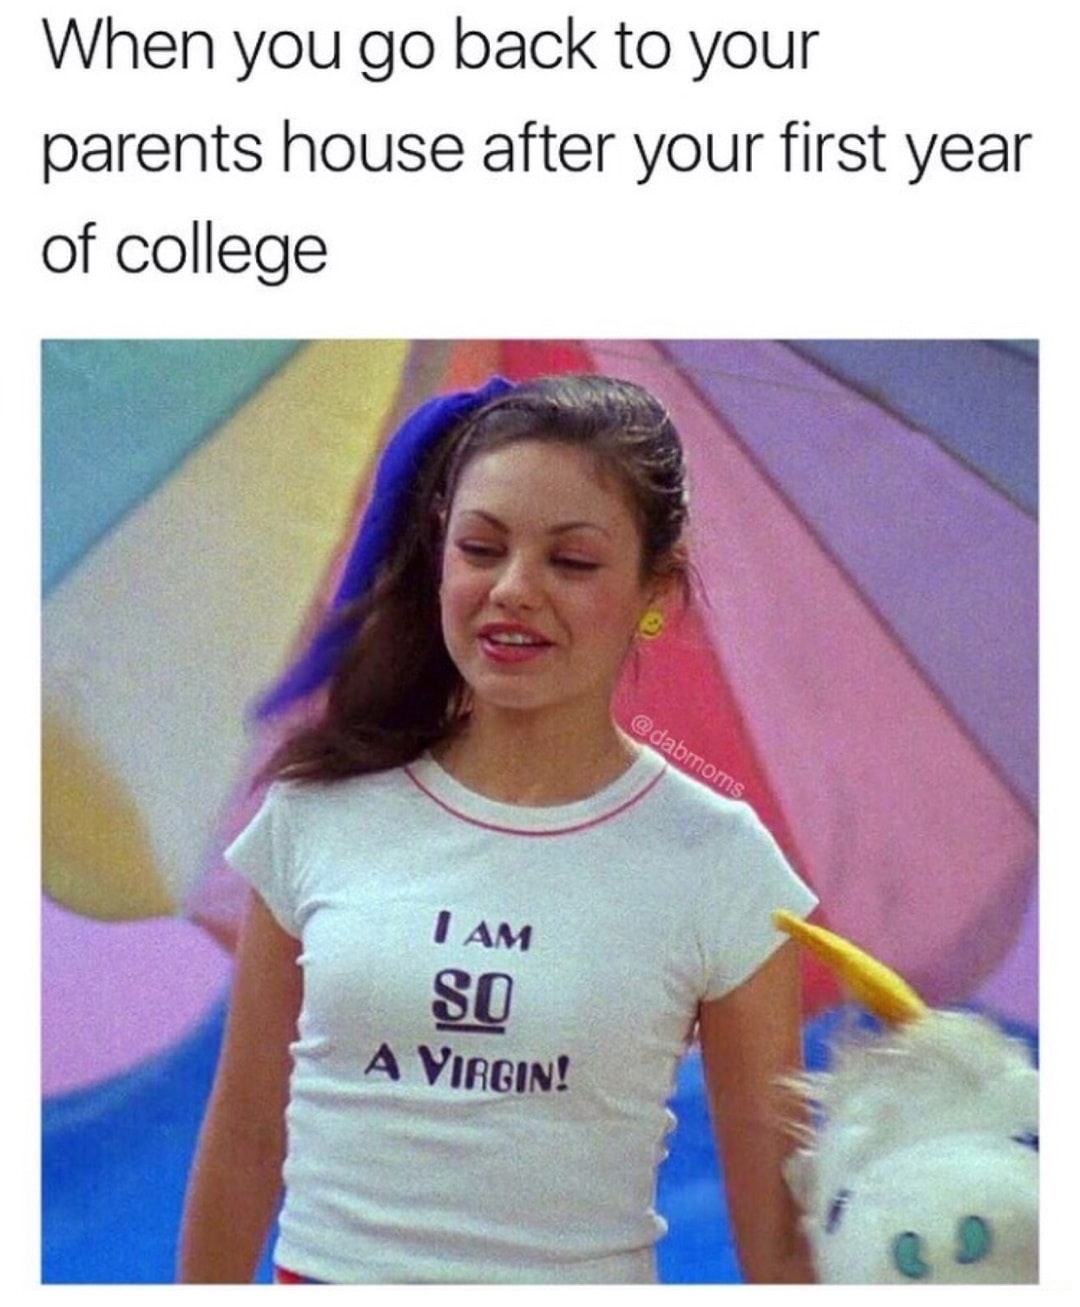 dank meme am so a virgin t shirt - When you go back to your parents house after your first year of college I Am So A Virgin!